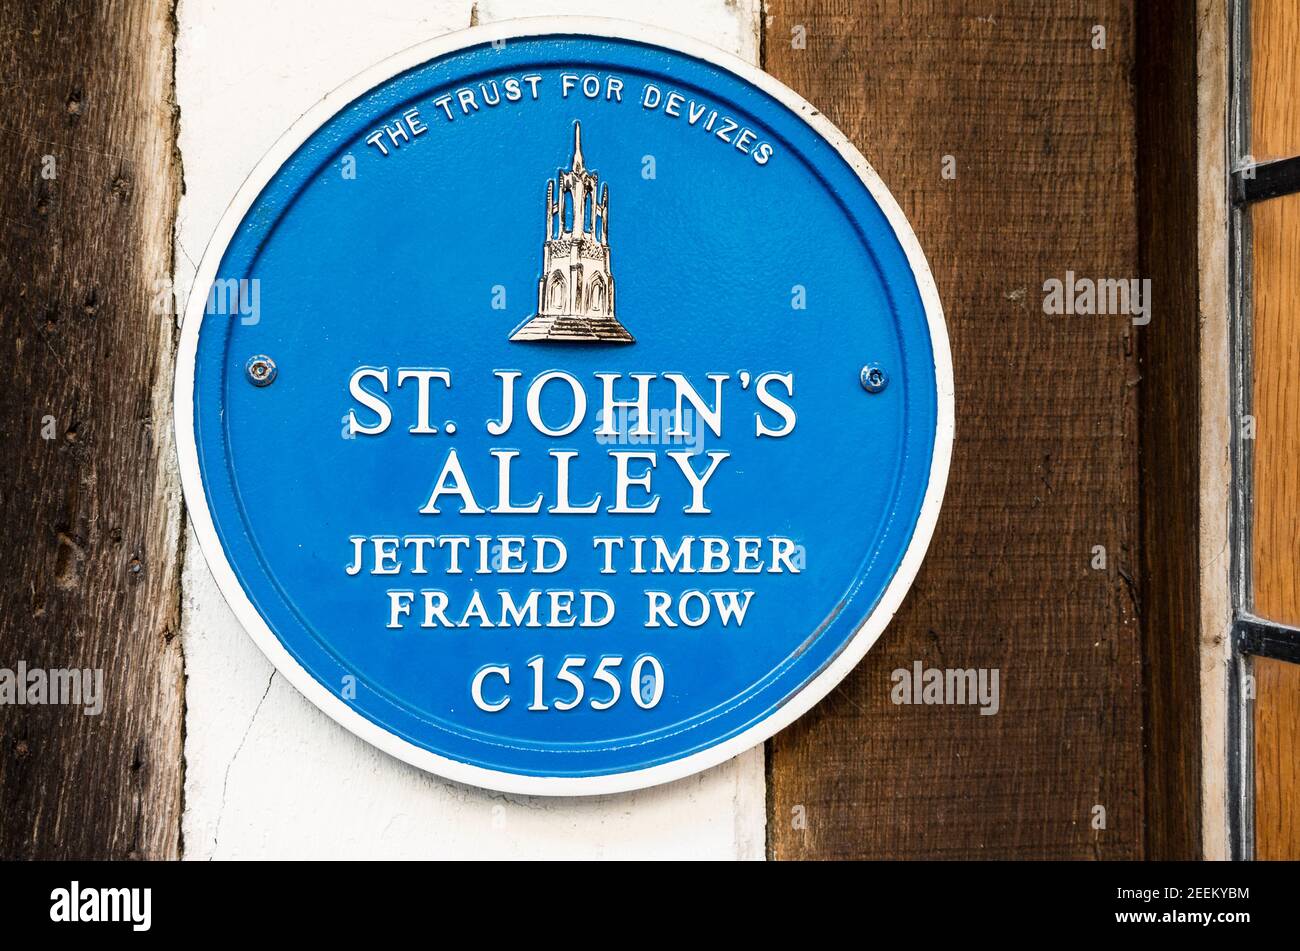 Blue plaque provided by the Trust for Devizes recording the early history of some historic buildings in St James's Alley Devizes Wiltshire England UK Stock Photo